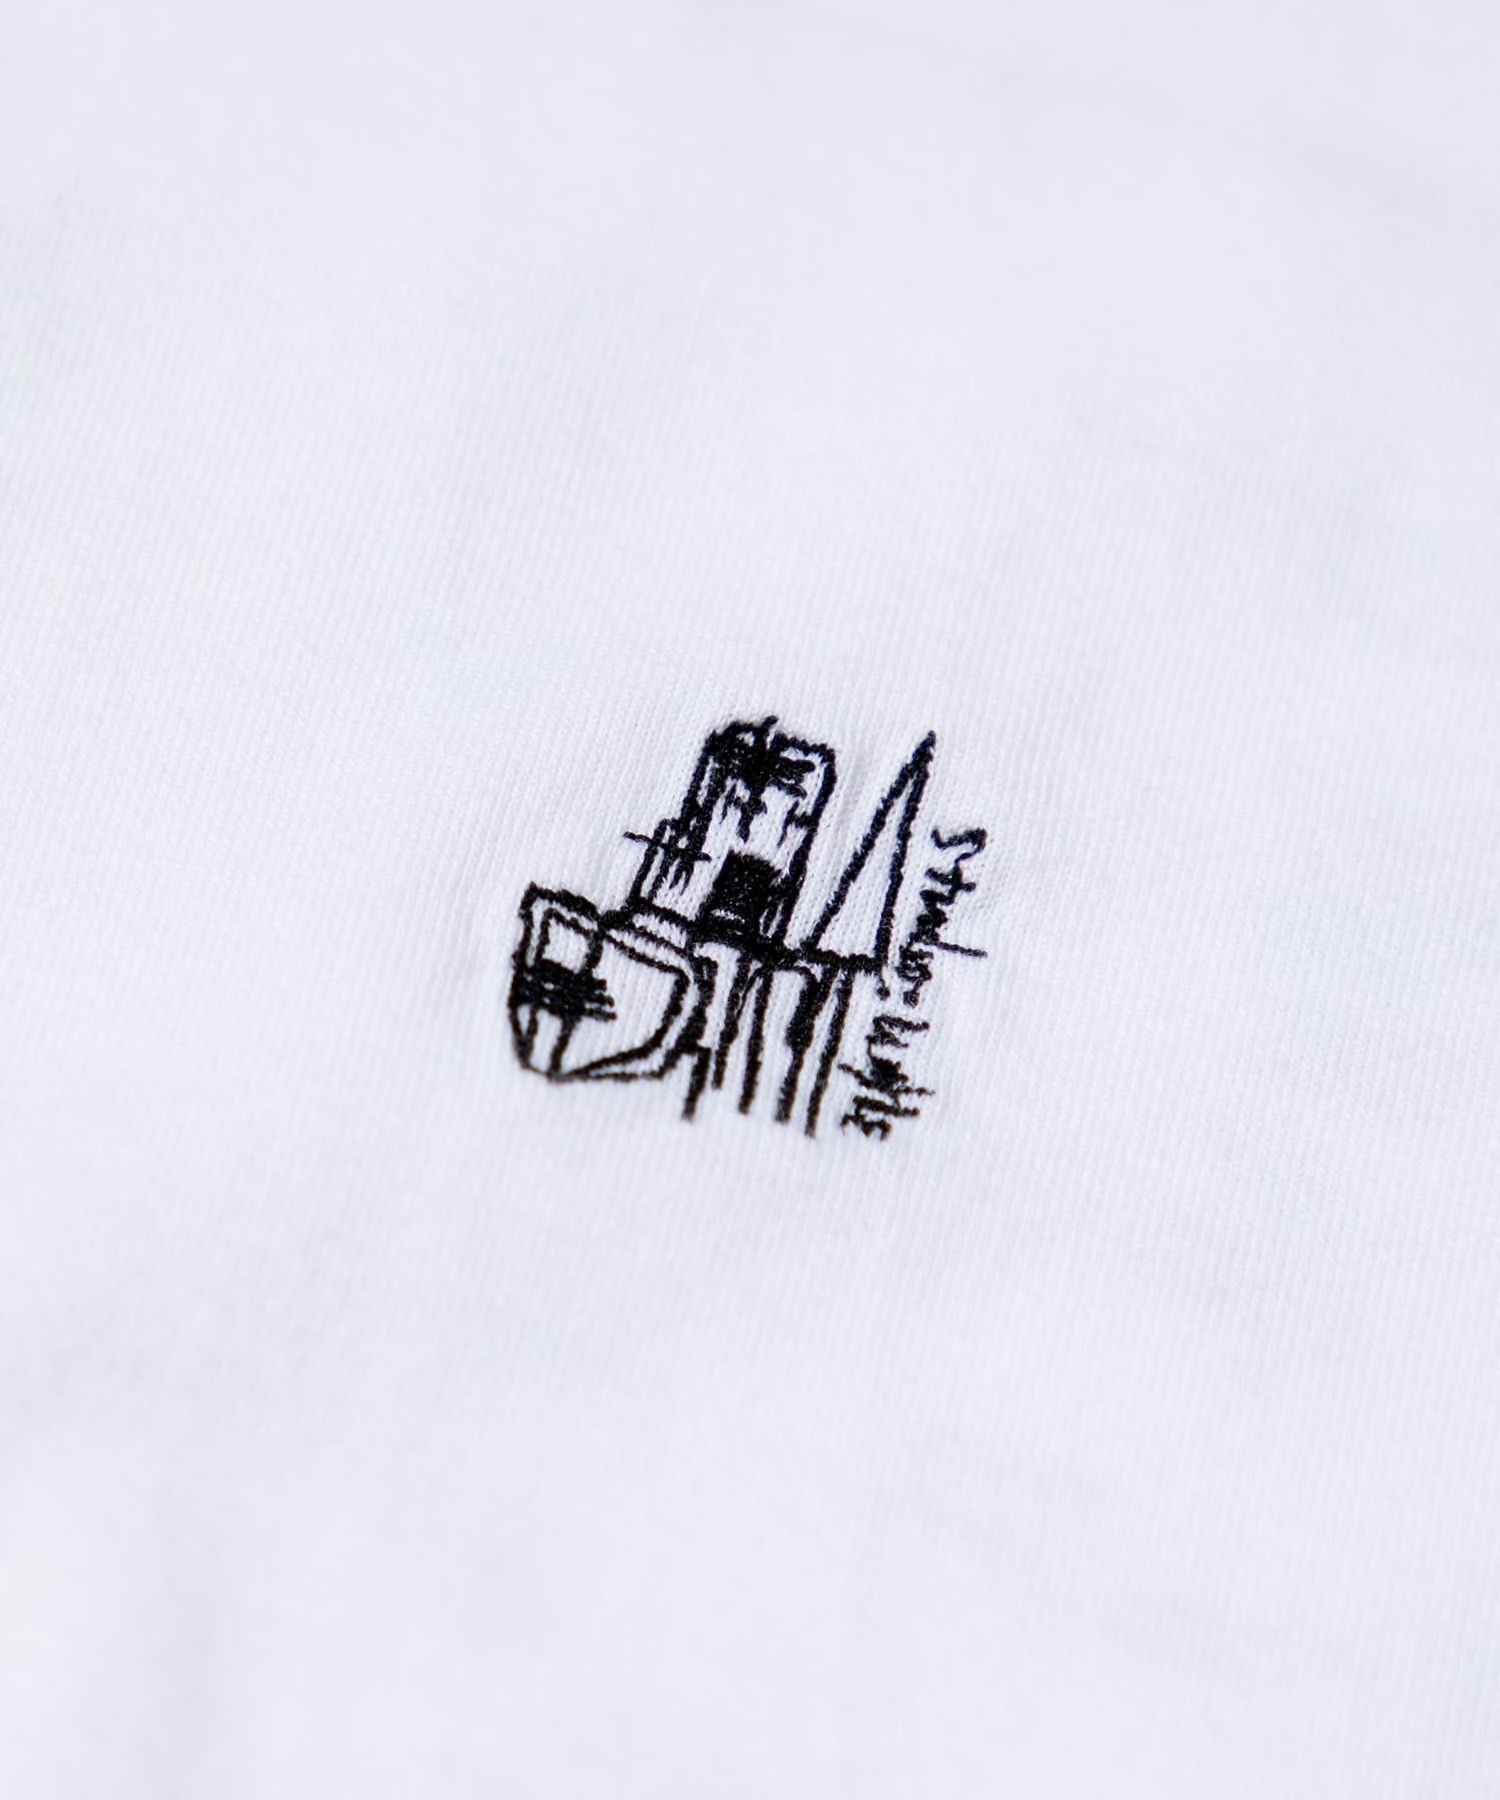 File:2021 studio ARMouR × UNKLE TEE 2 white front detail.jpg